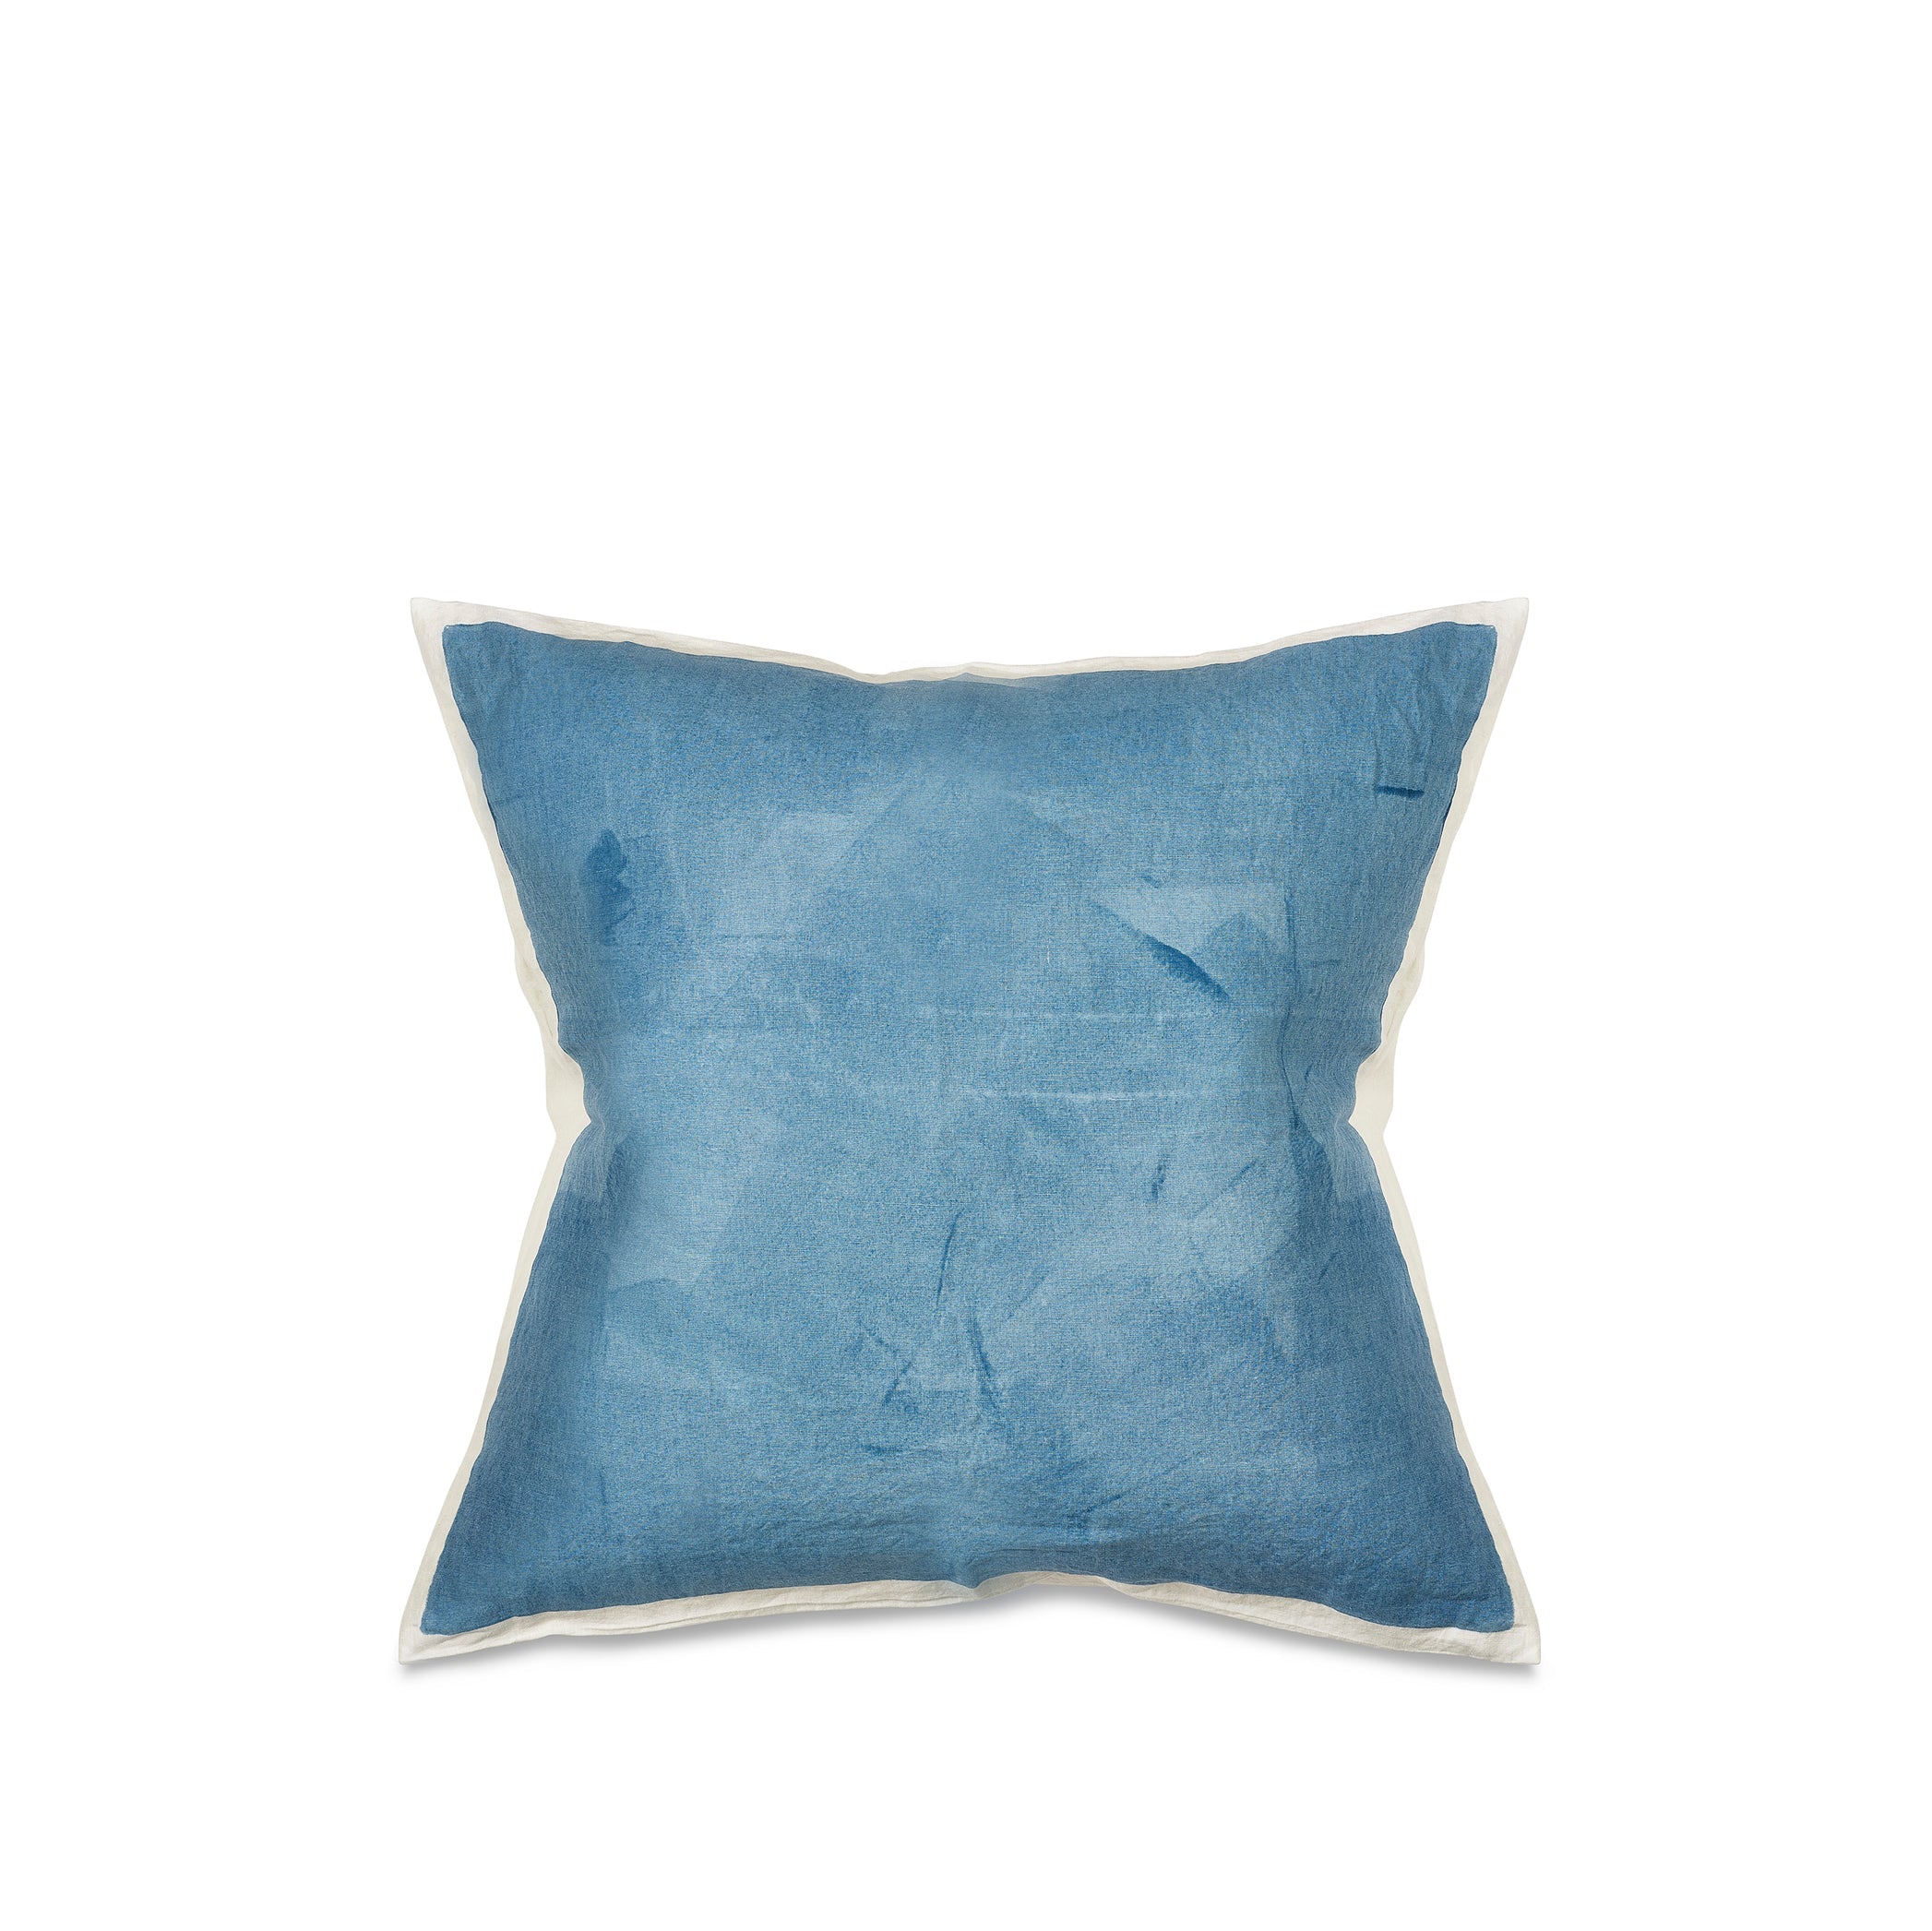 Hand Painted Linen Cushion in Sky Blue, 60cm x 60cm